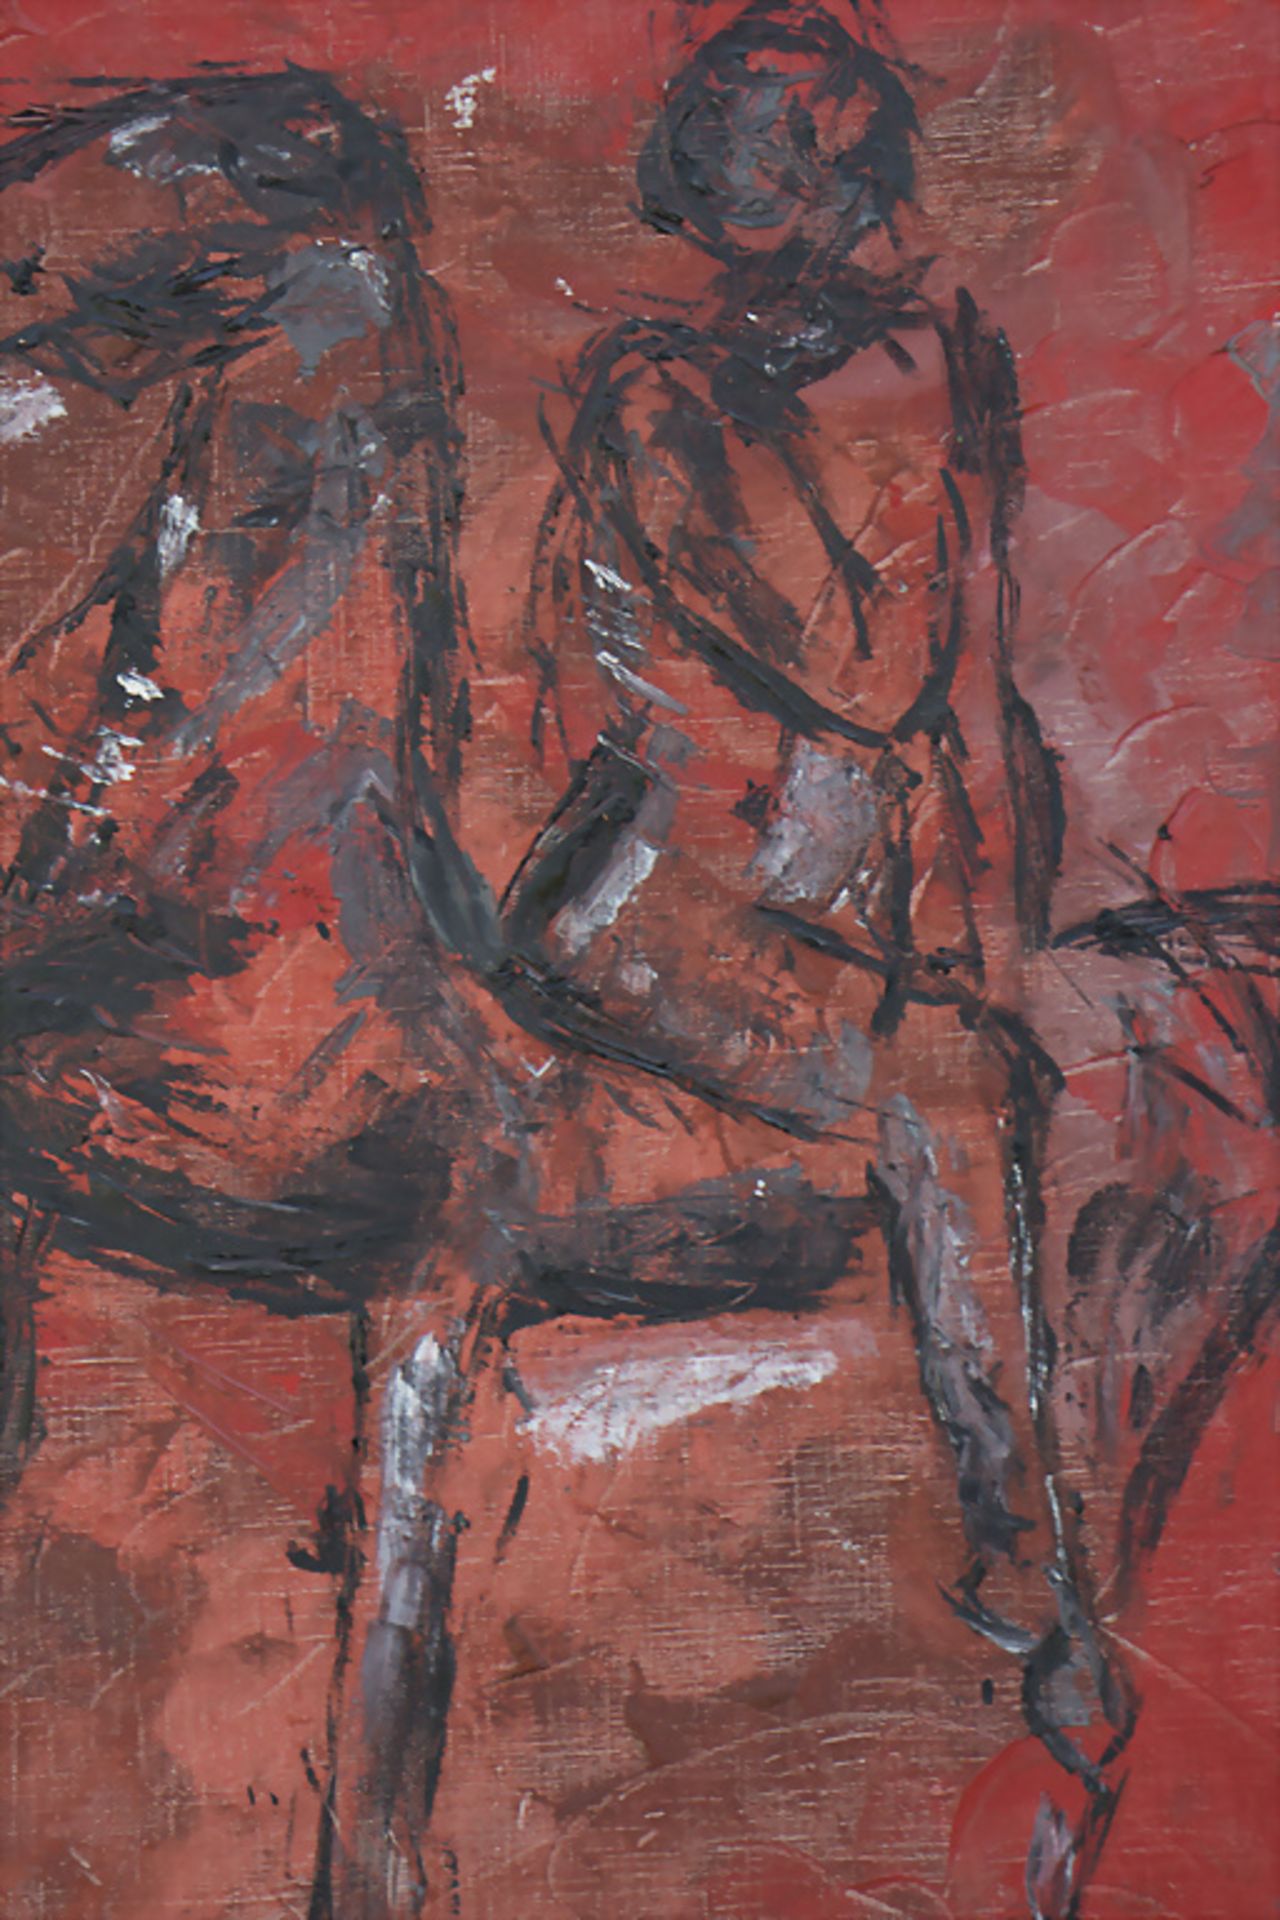 Eberhard Heyd, 'Roter Reiter' / 'Red rider', 1965 - Image 6 of 7